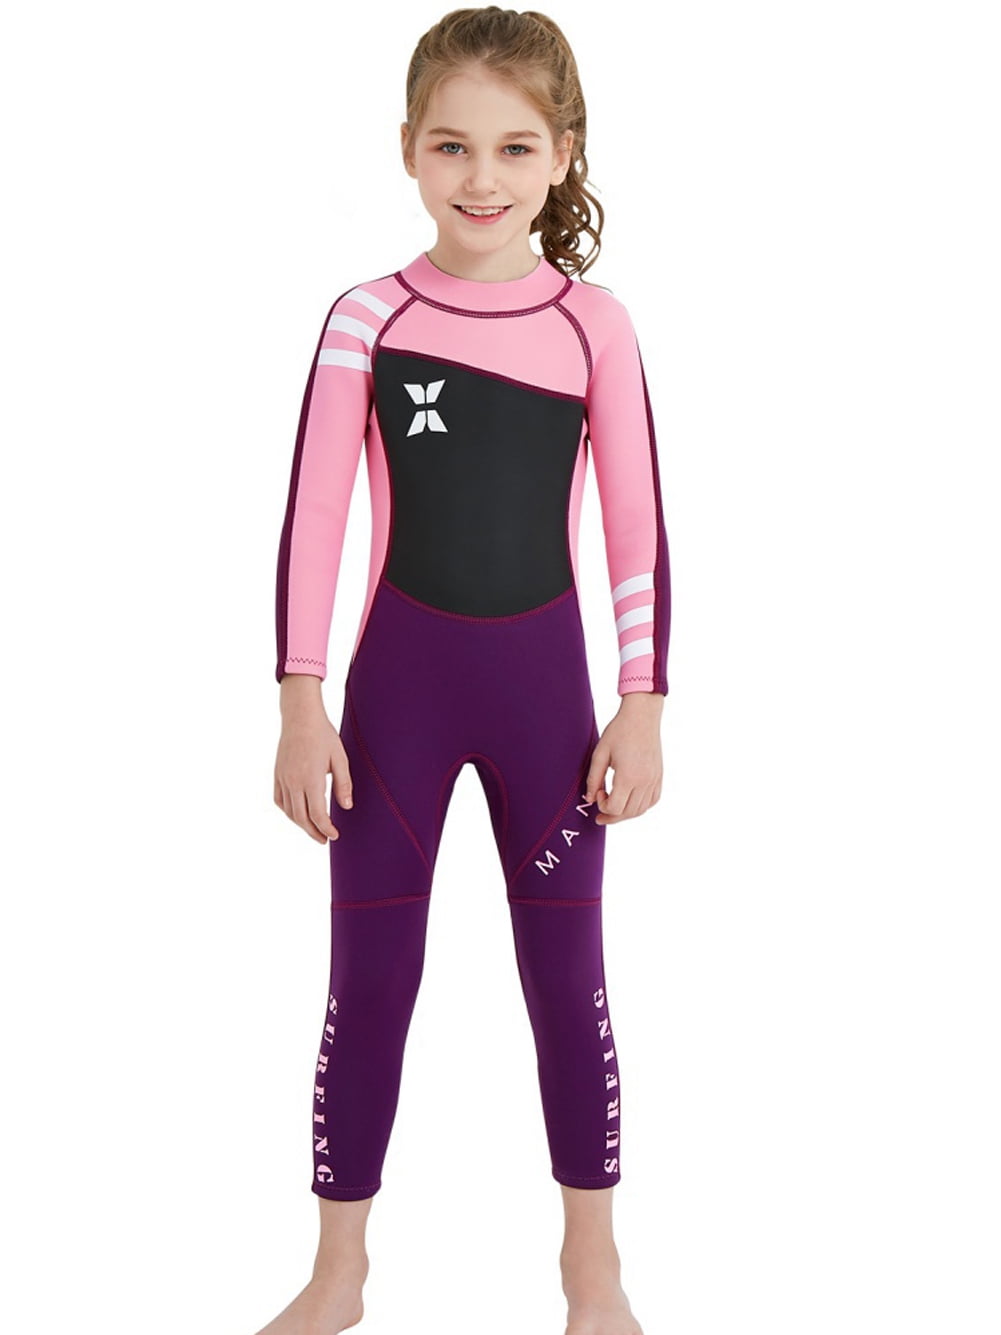 MWTA Wetsuit Kids and Boy 2.5mm Neoprene Warm Wetsuit One Piece UV Protection Shorty Swimming Surfing Kayaking Canoeing Suit